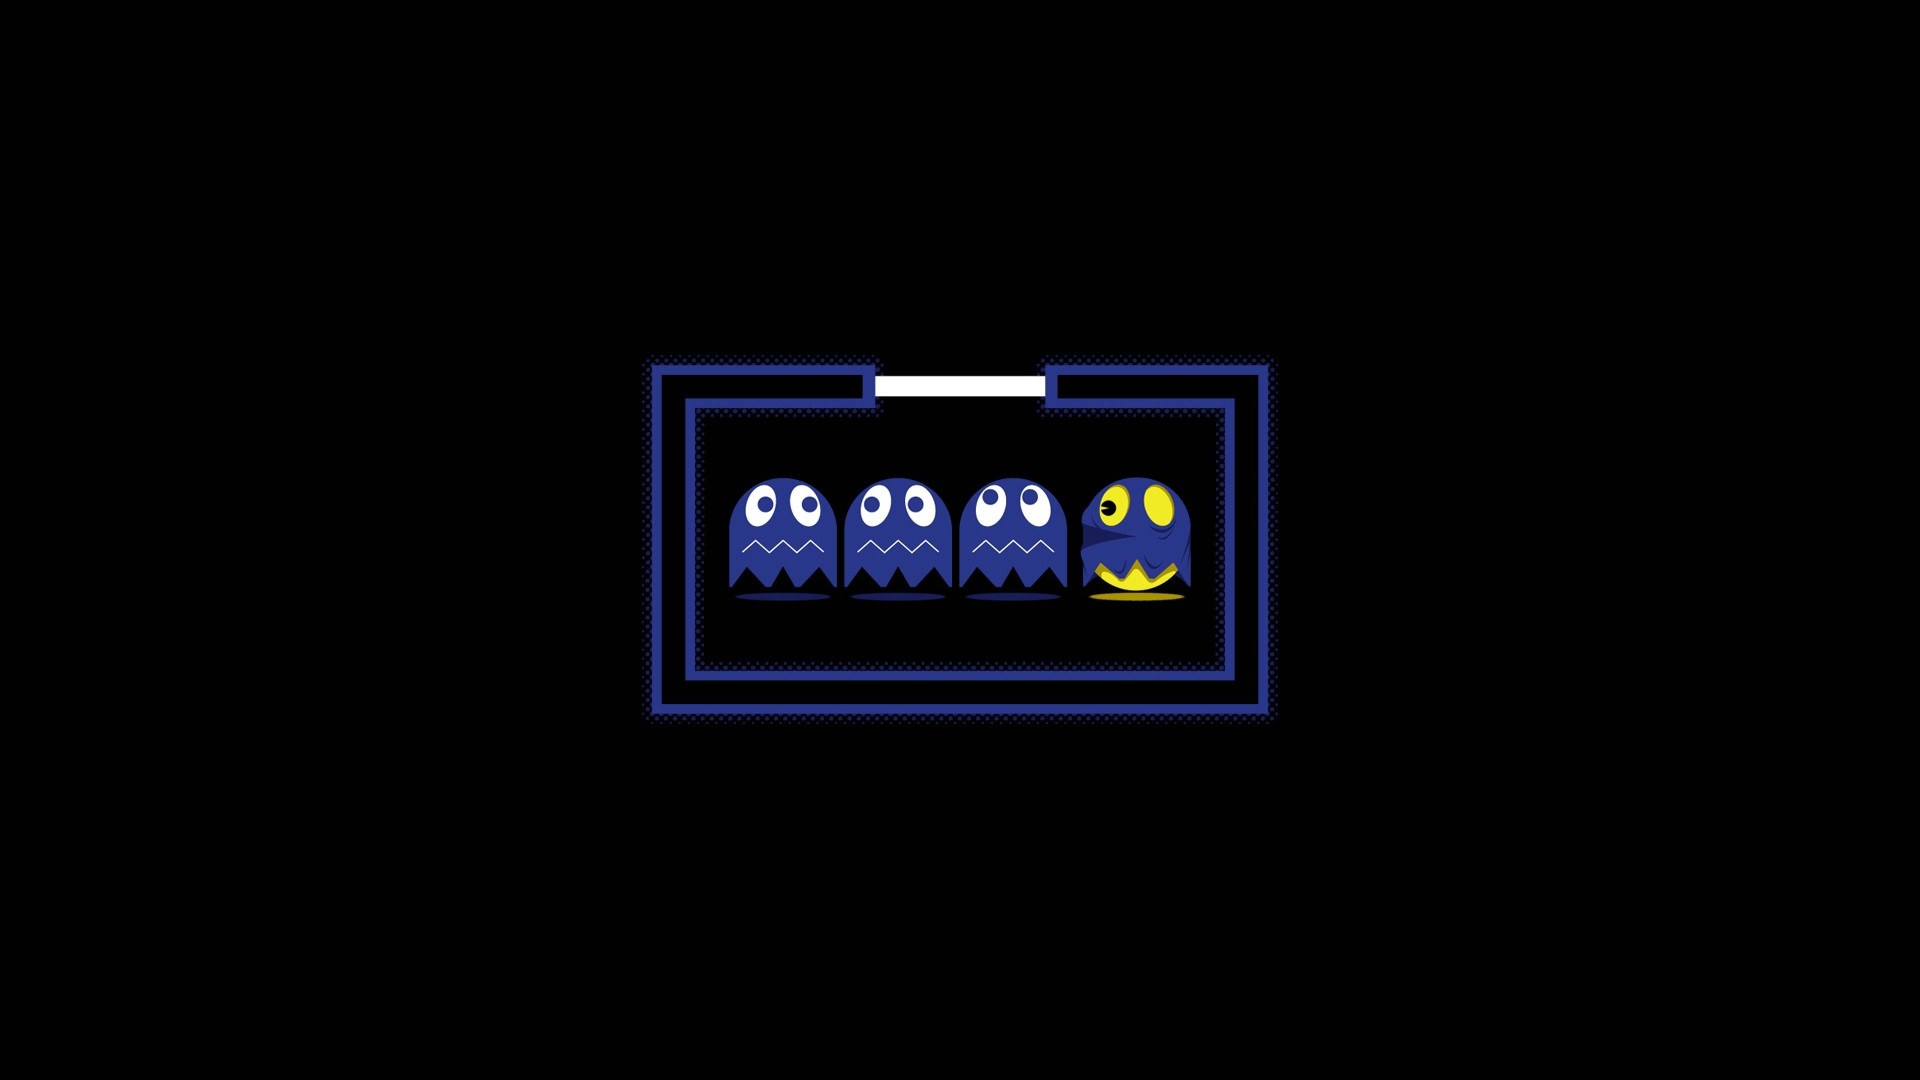 cartoons, Abstract, Video, Games, Ghosts, Solid, Pac man, Simplistic, Simple Wallpaper